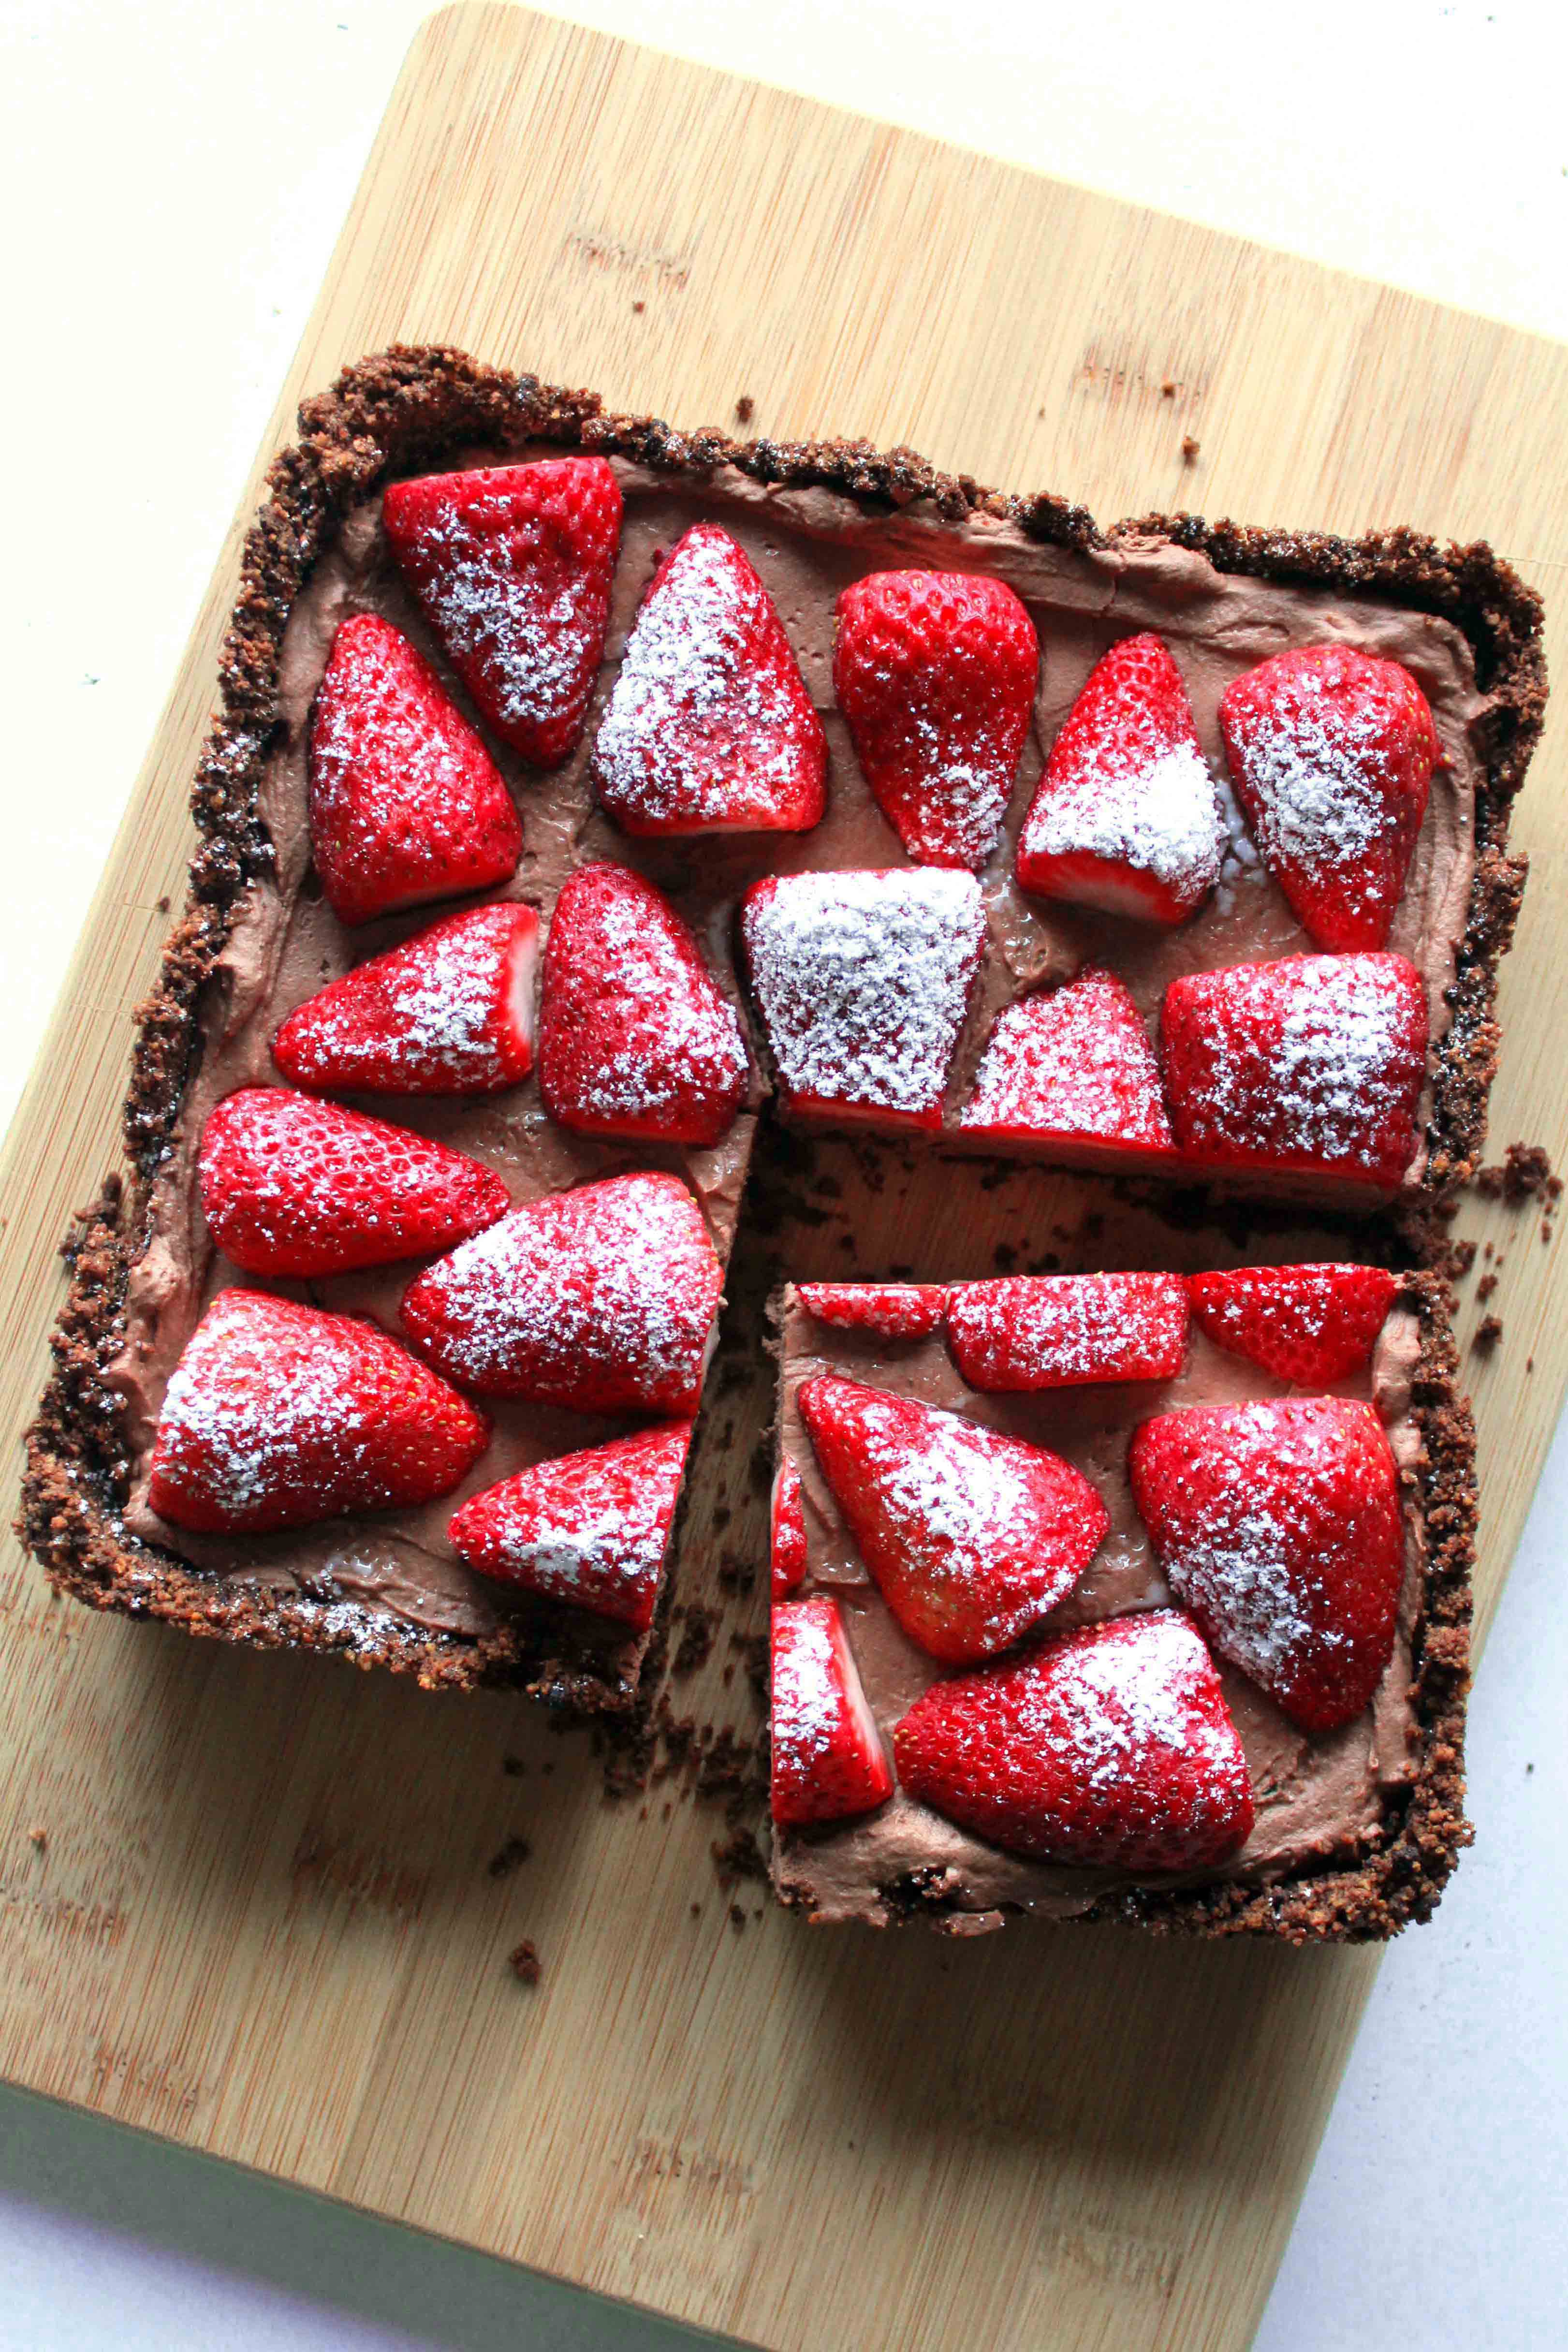 http://ohsweetday.com/2013/04/strawberry-and-chocolate-cream-pie.html